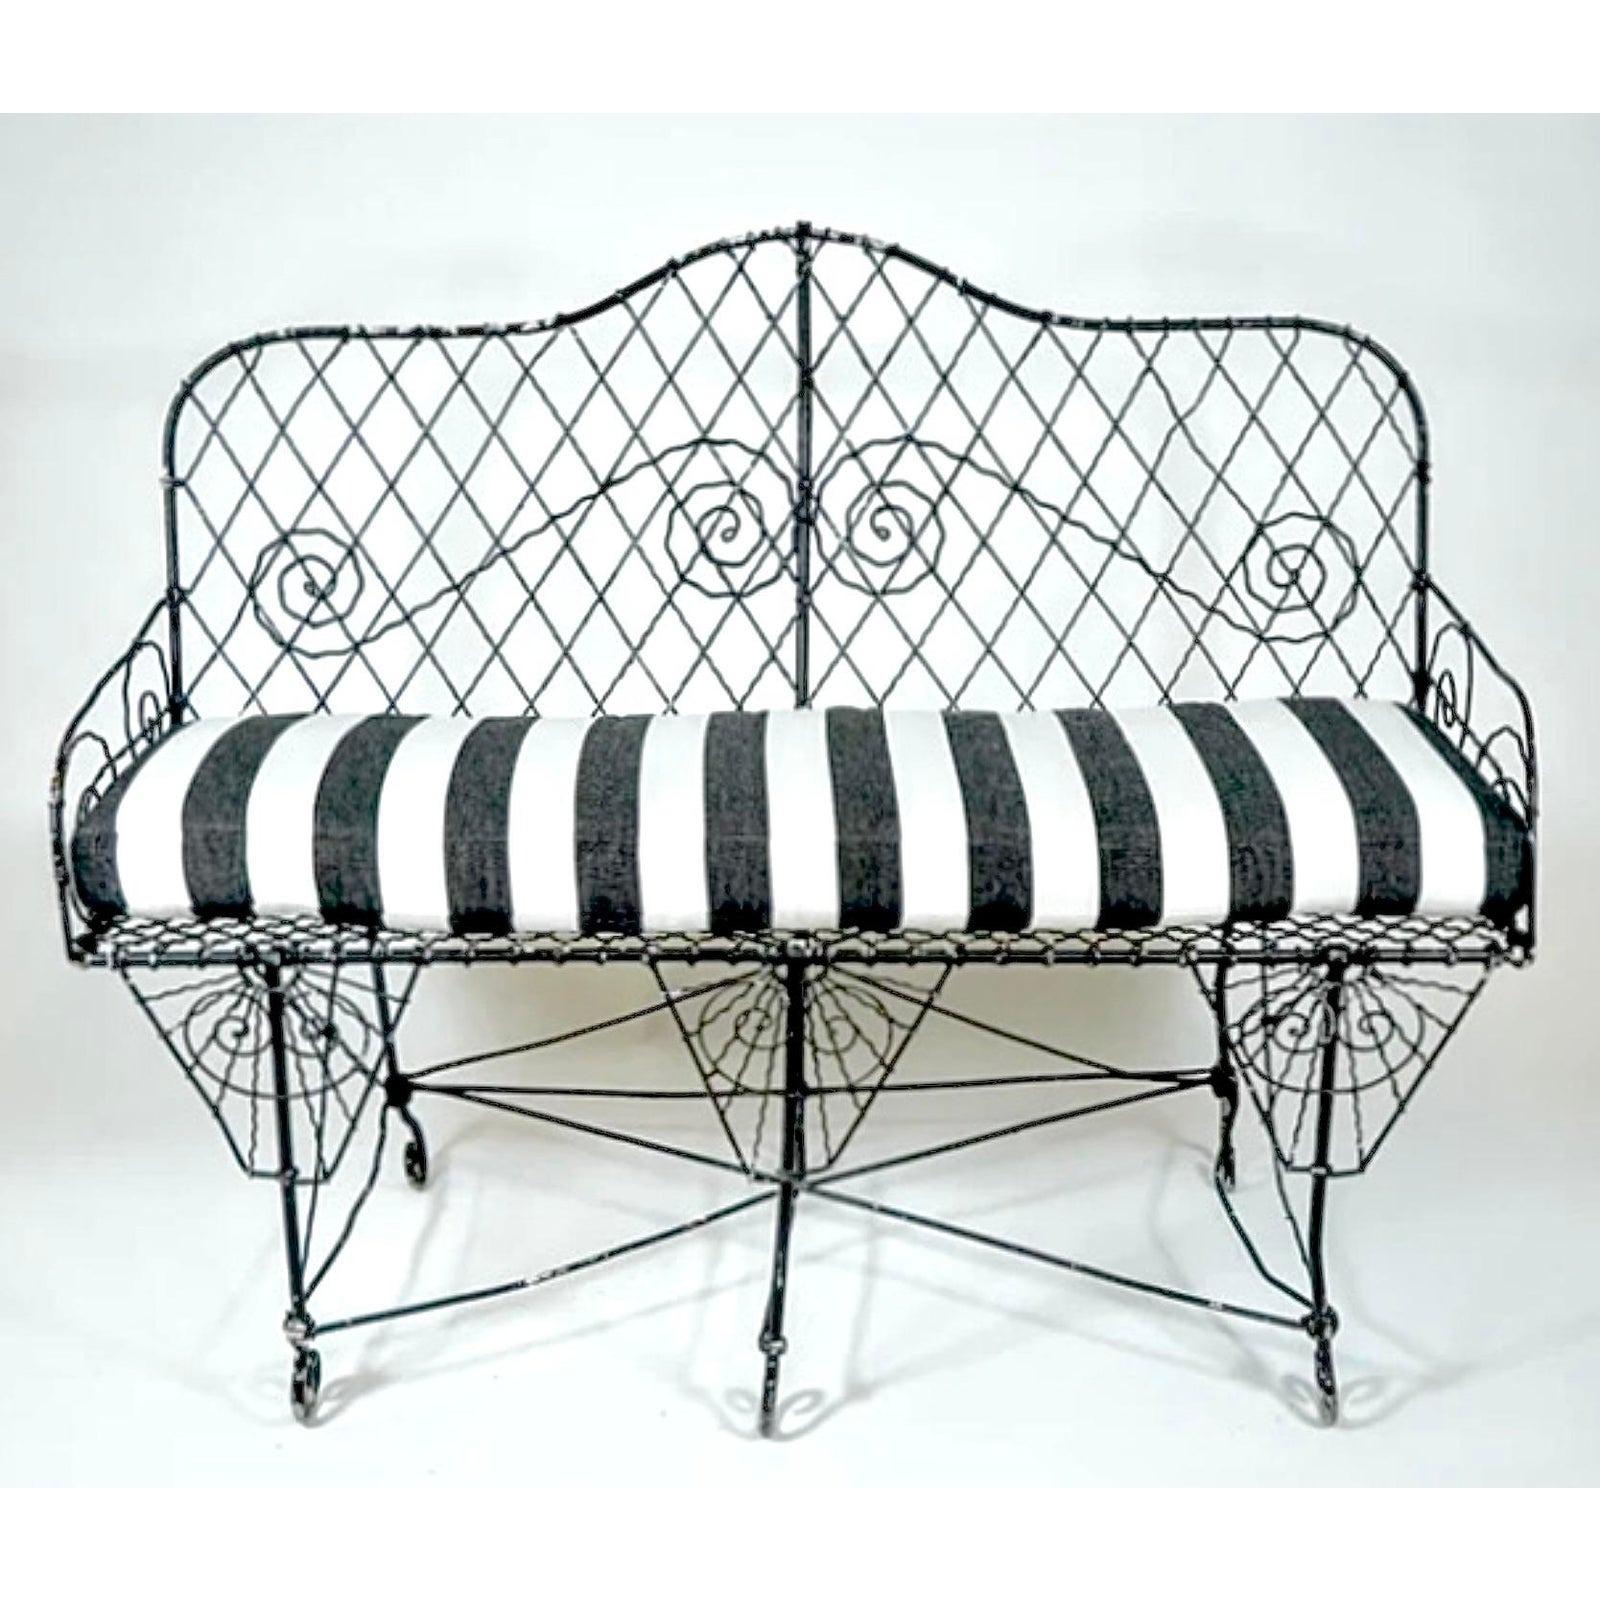 A fabulous vintage French wire garden bench. A beautiful 19th century Art Nouveau piece with incredible wire work. New cabana striped cushion for extra glamour. Acquired from a Palm Beach estate.

The bench is in great structural condition. Scuffs